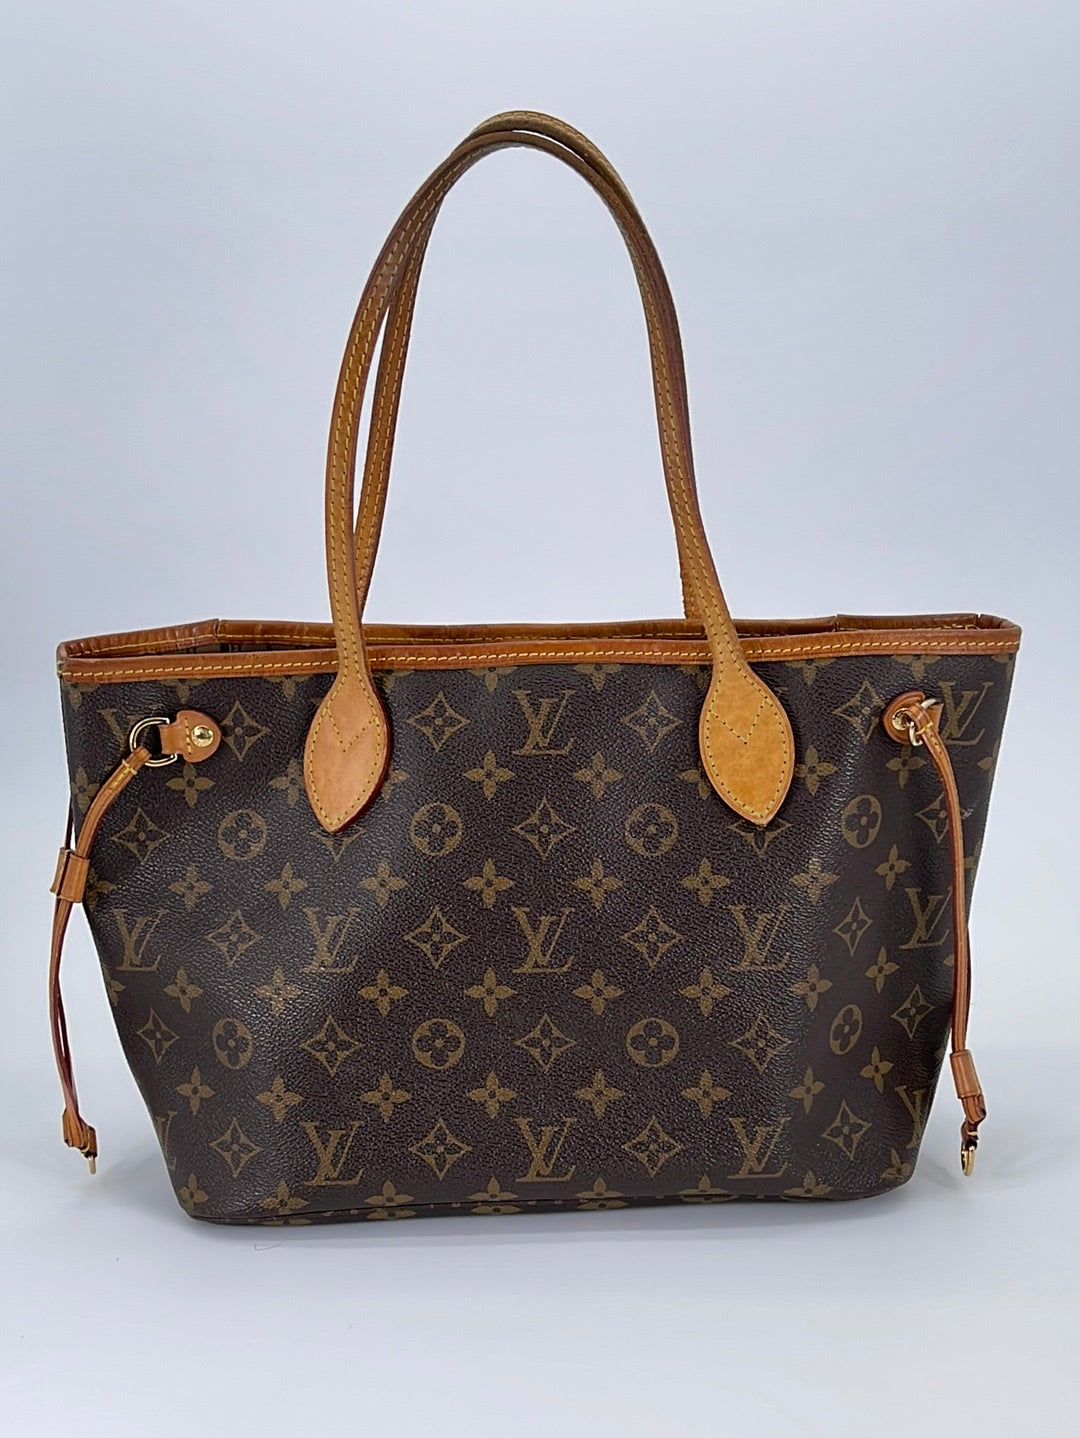 Louis Vuitton Small Monogram Neverfull PM Tote bag 11lk323s For